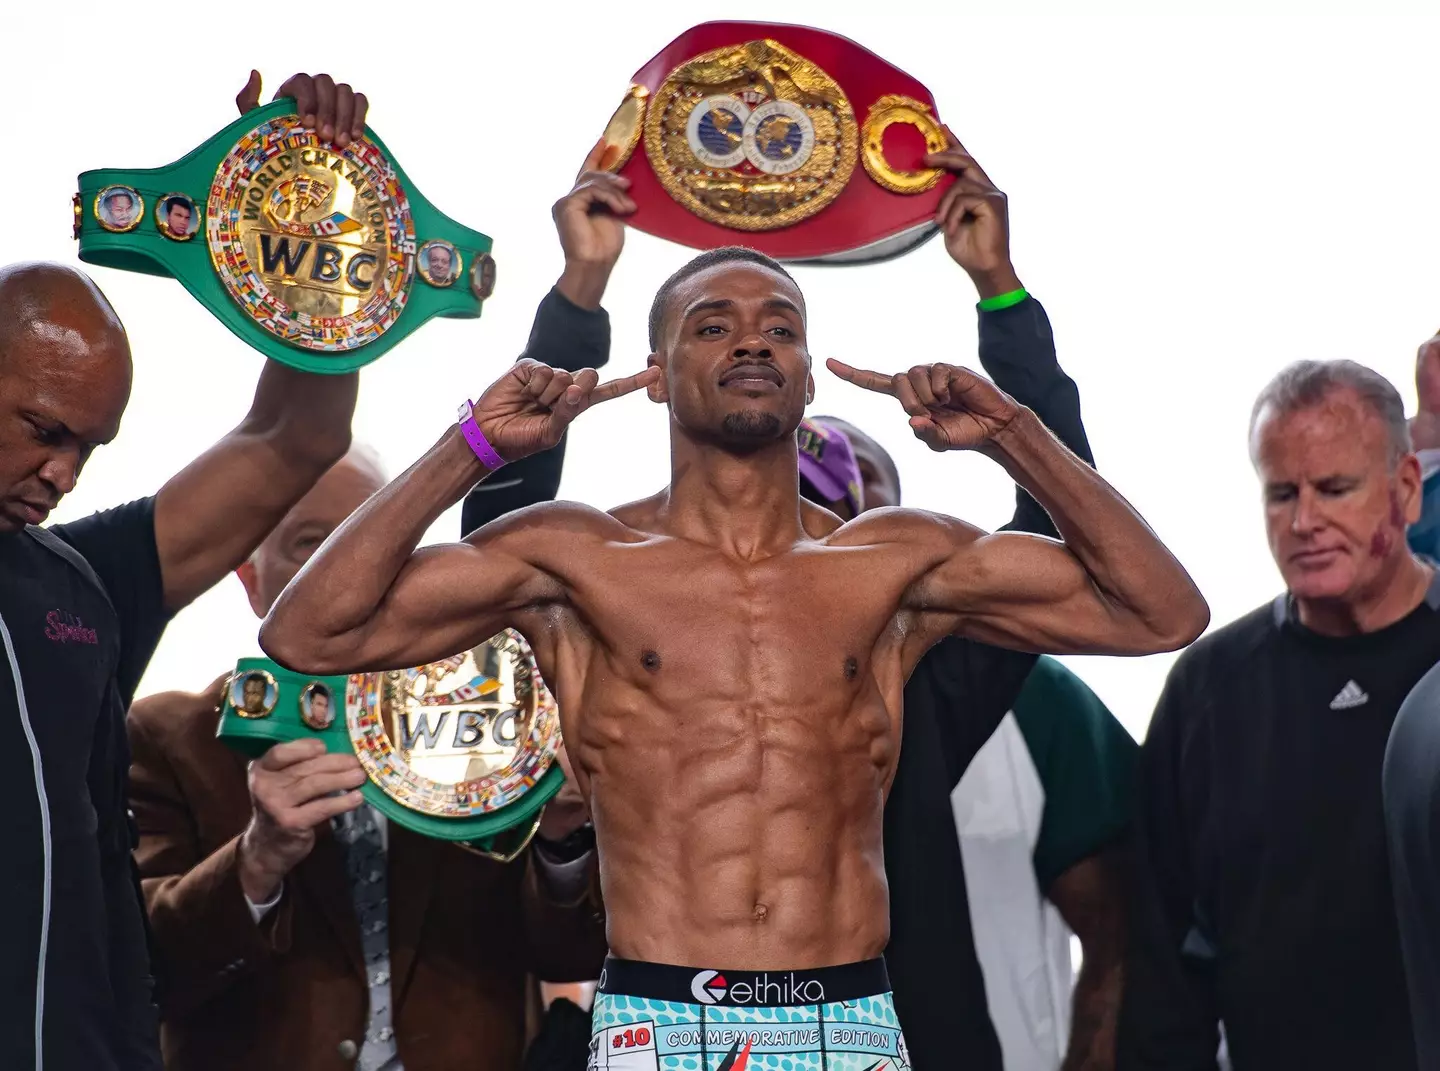 Errol Spence Jr appeared to be mostly unharmed in the crash.